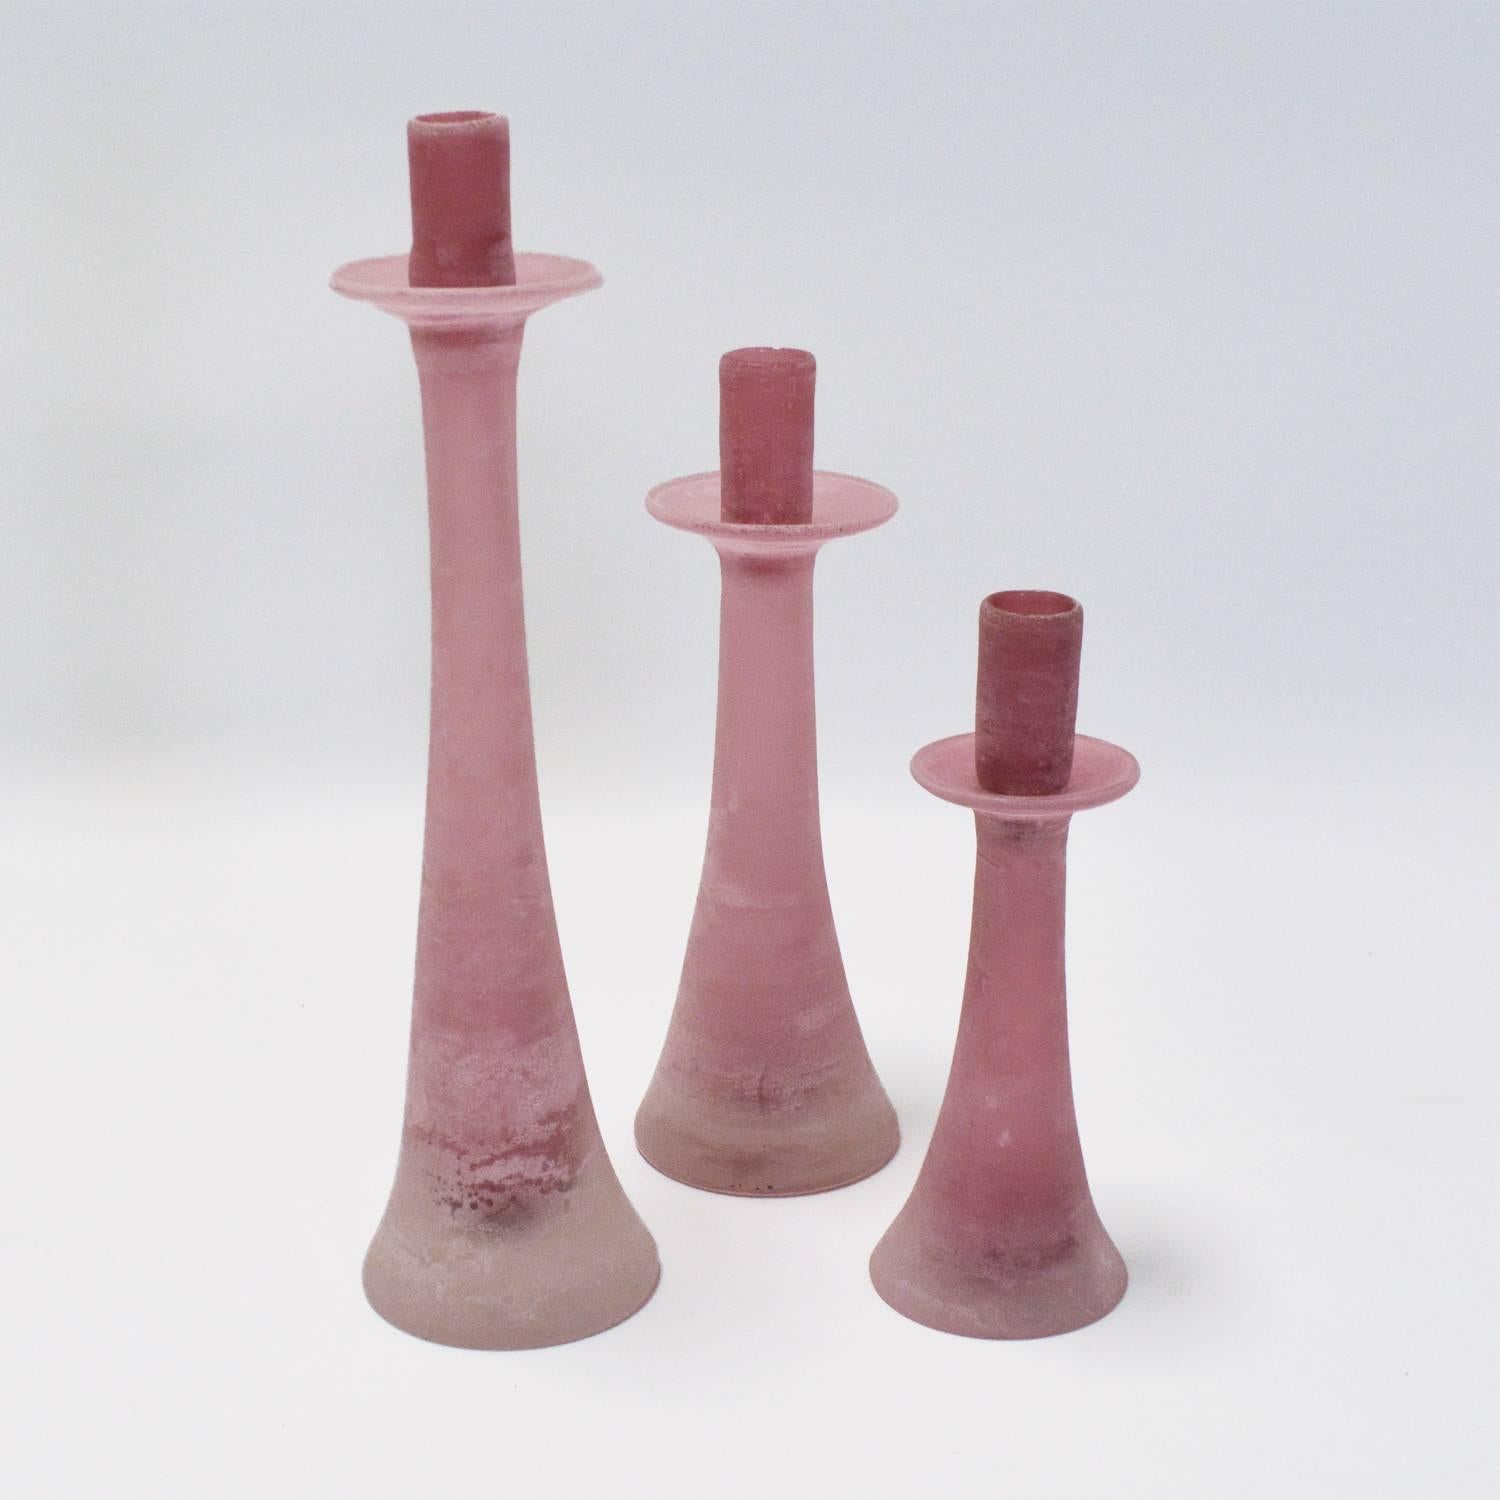 Lovely and rare pink Murano glass candle stick holders by Cenedes in the scavo technique. Signed.
Large 16.75" H Diameter 4.25"
Medium 13" H   Diameter 4.25"
Small 10.25"  H Diameter 3.75" 